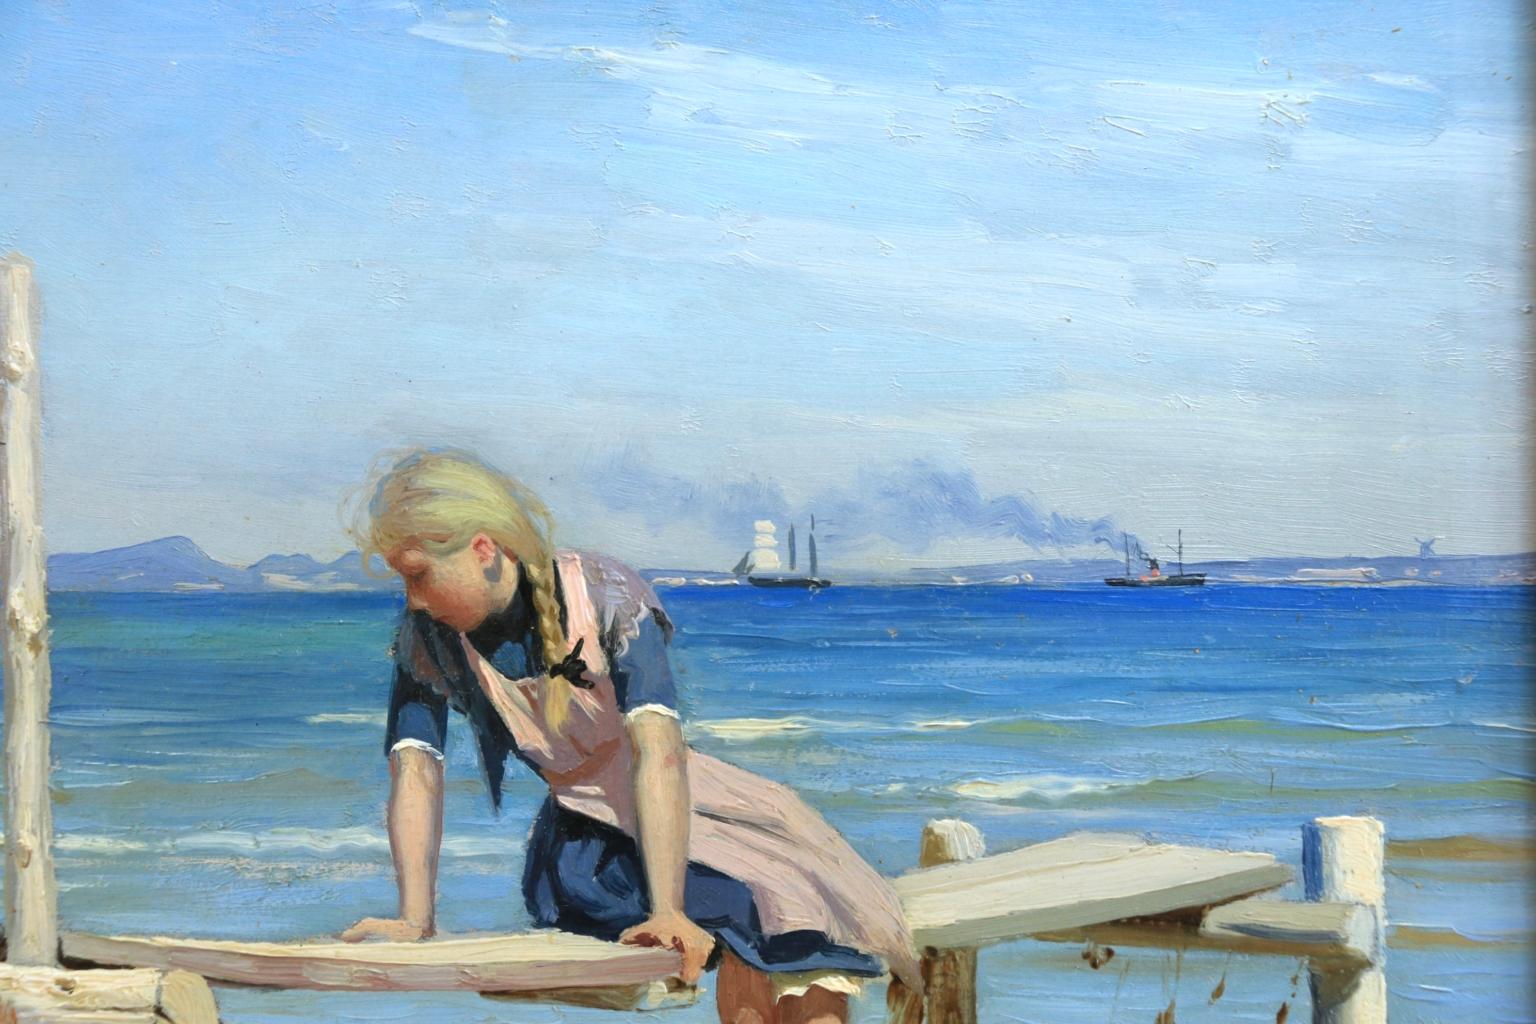 Girl on a Jetty - The Oresund at Hellebæk - Realist Oil, Seascape by PM Mønsted - Blue Figurative Painting by Peder Mørk Mønsted